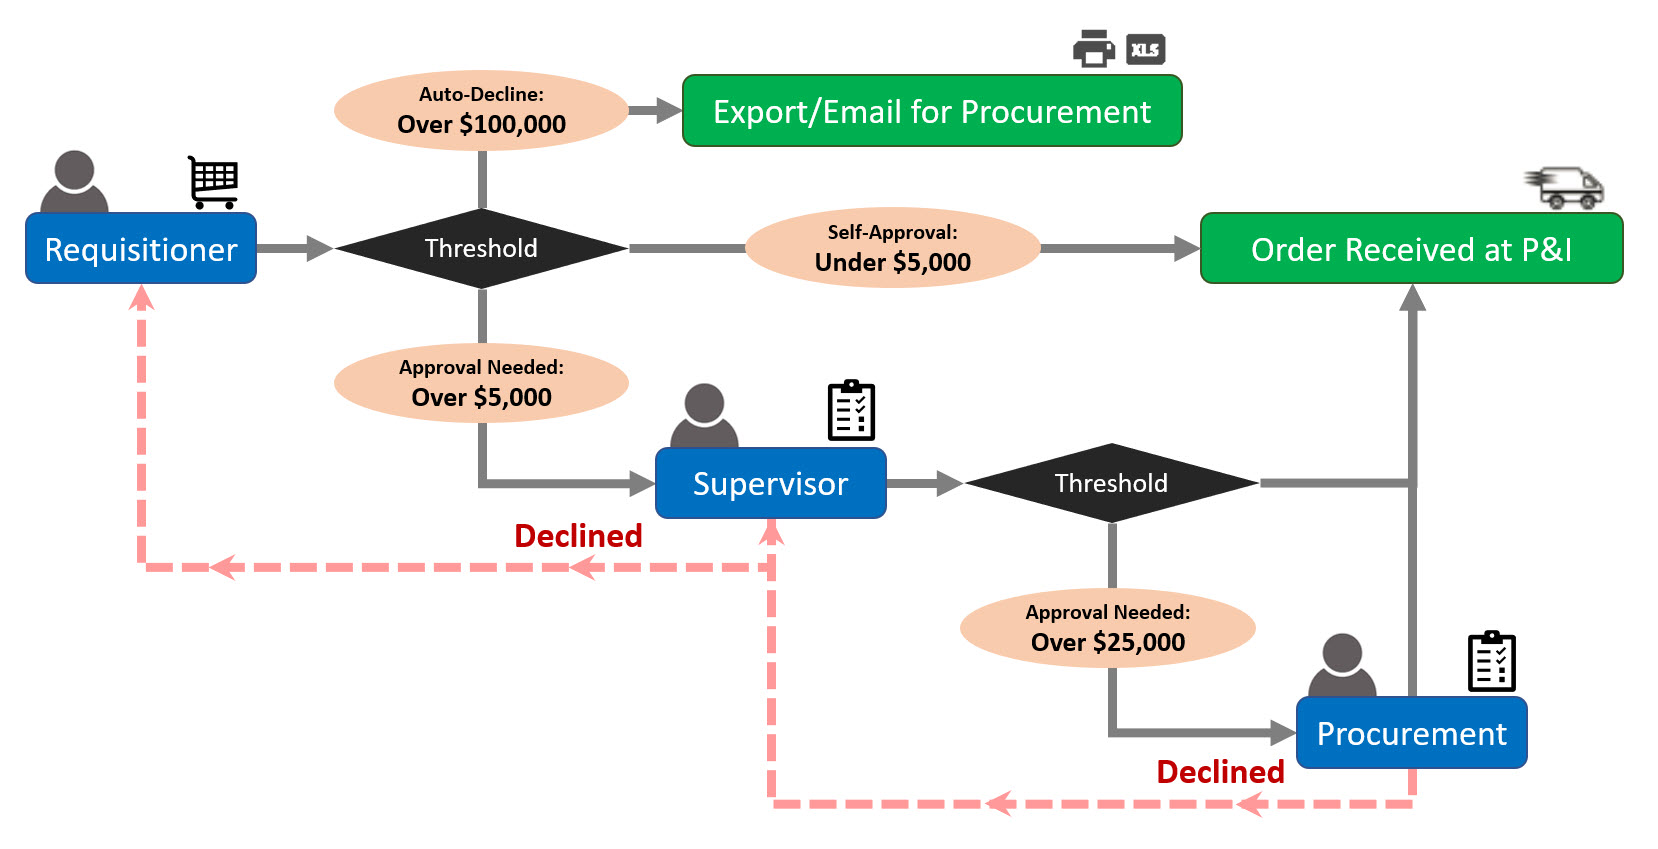 Diagram: Approval Workflow from Requisitioner to Procurement with Thresholds